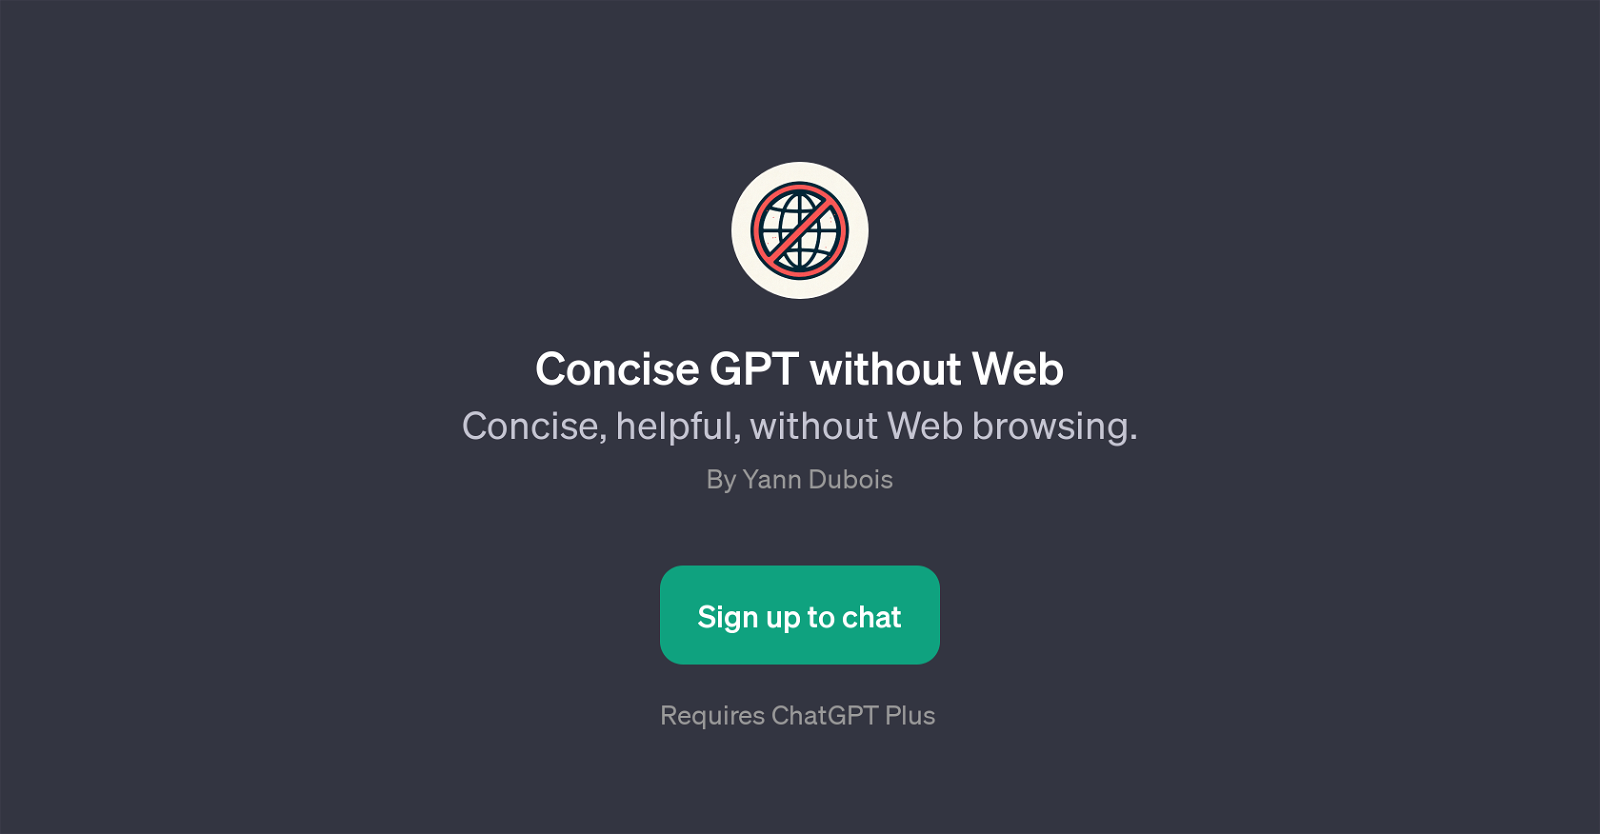 Concise GPT without Web website